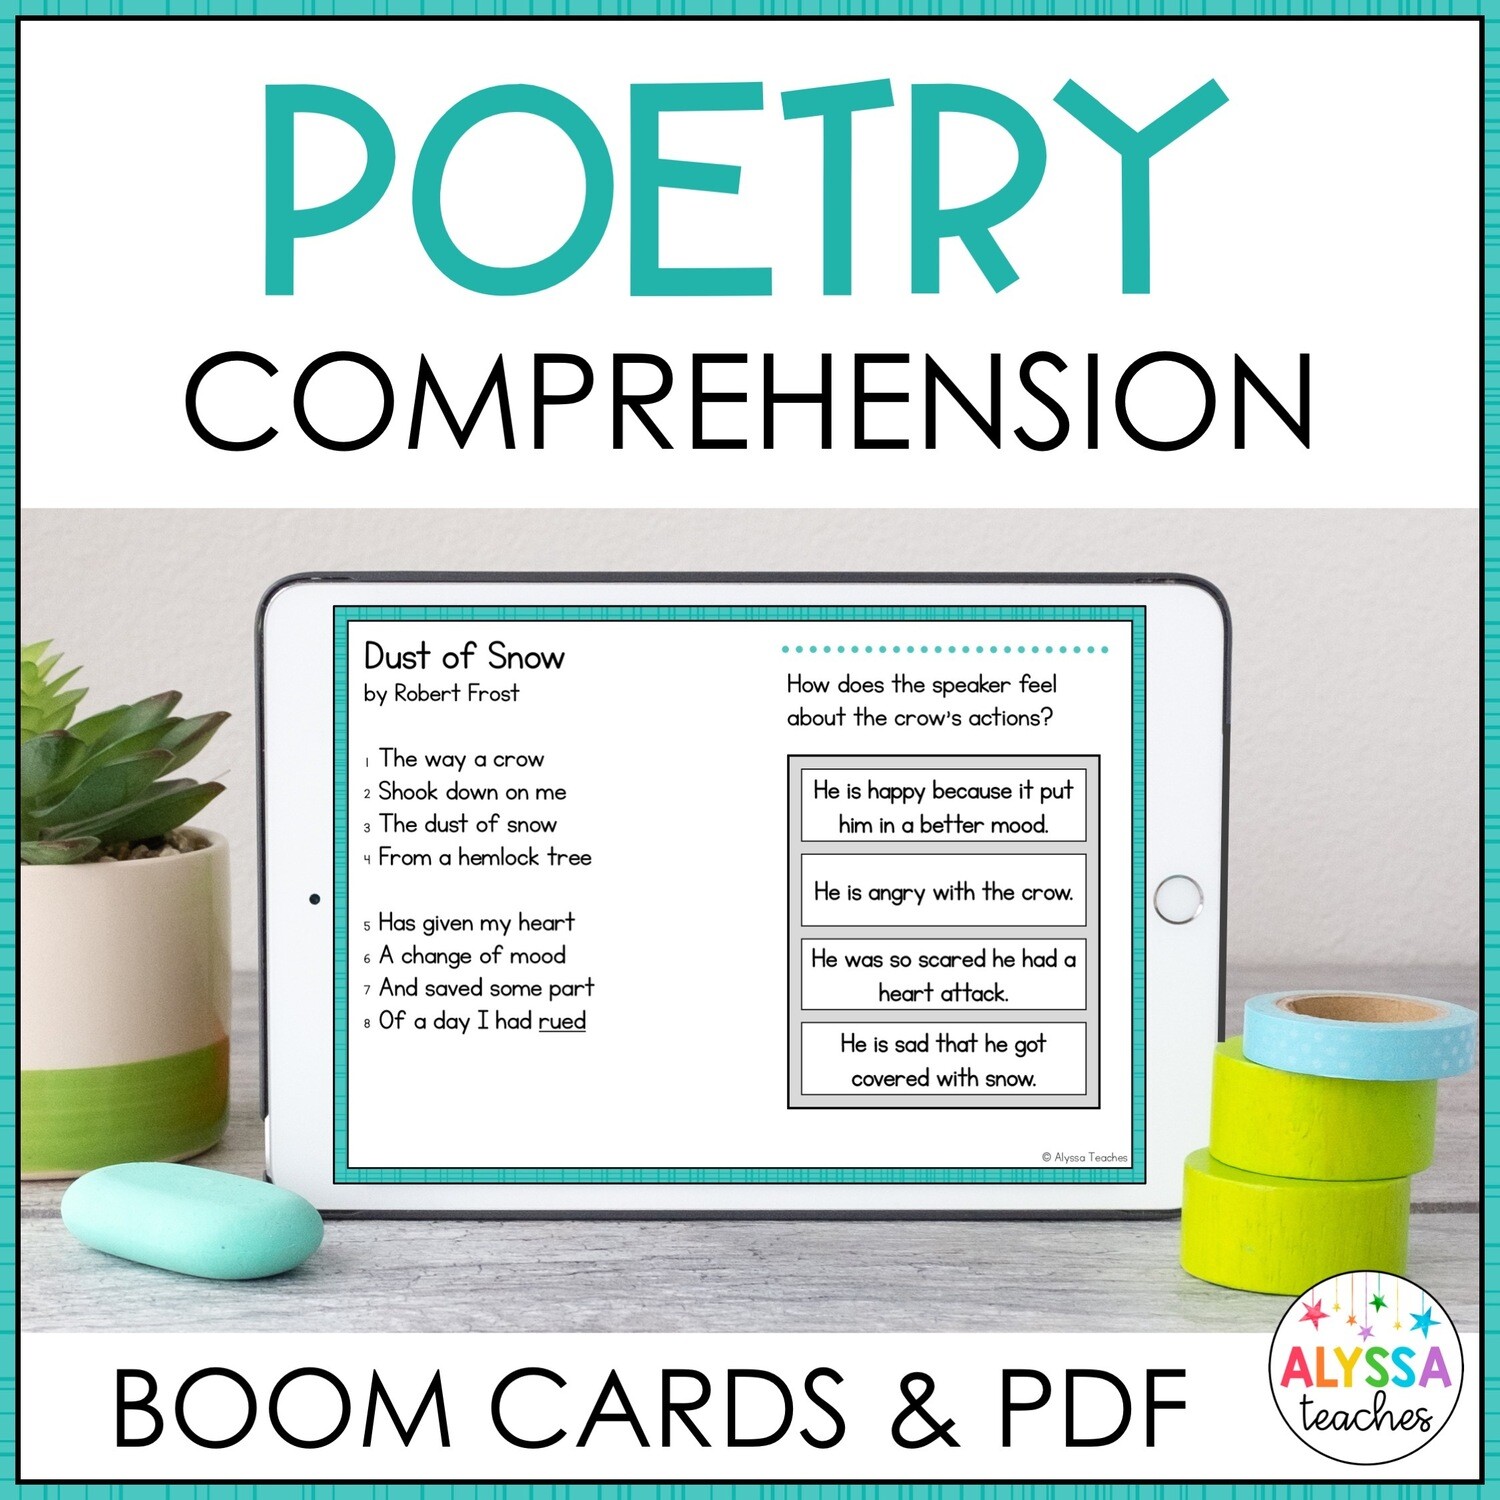 Poetry Reading Comprehension and Questions (Print & Digital)